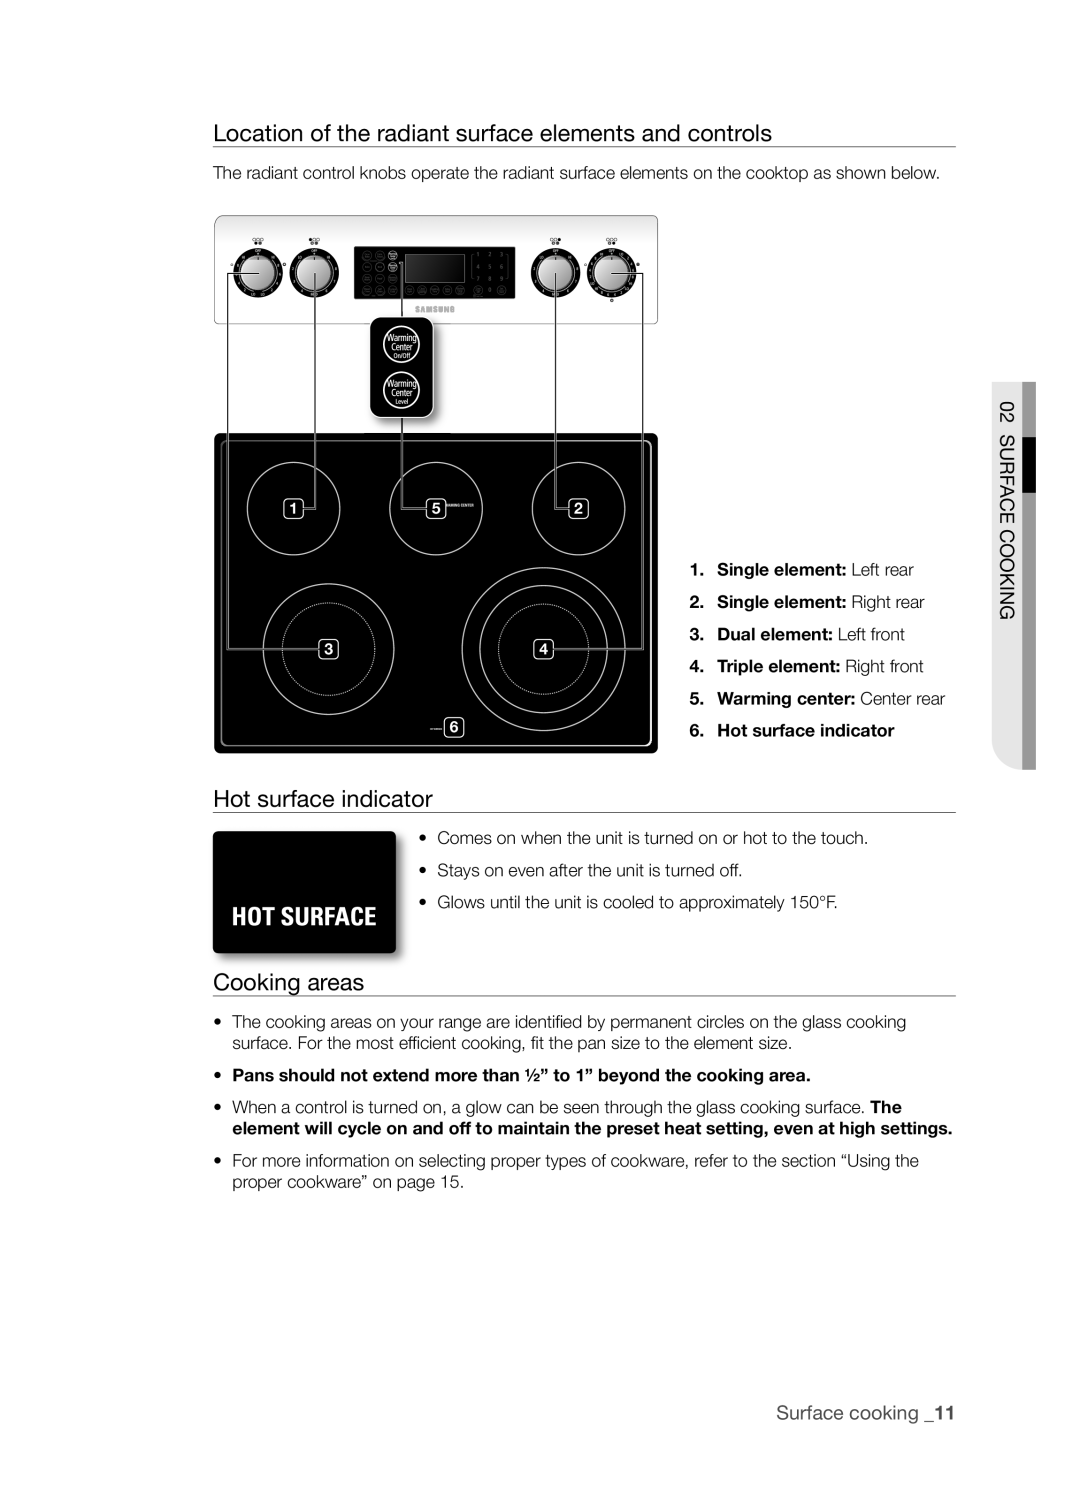 Samsung FTQ386LWUX user manual Location of the radiant surface elements and controls, Hot surface indicator, Cooking areas 